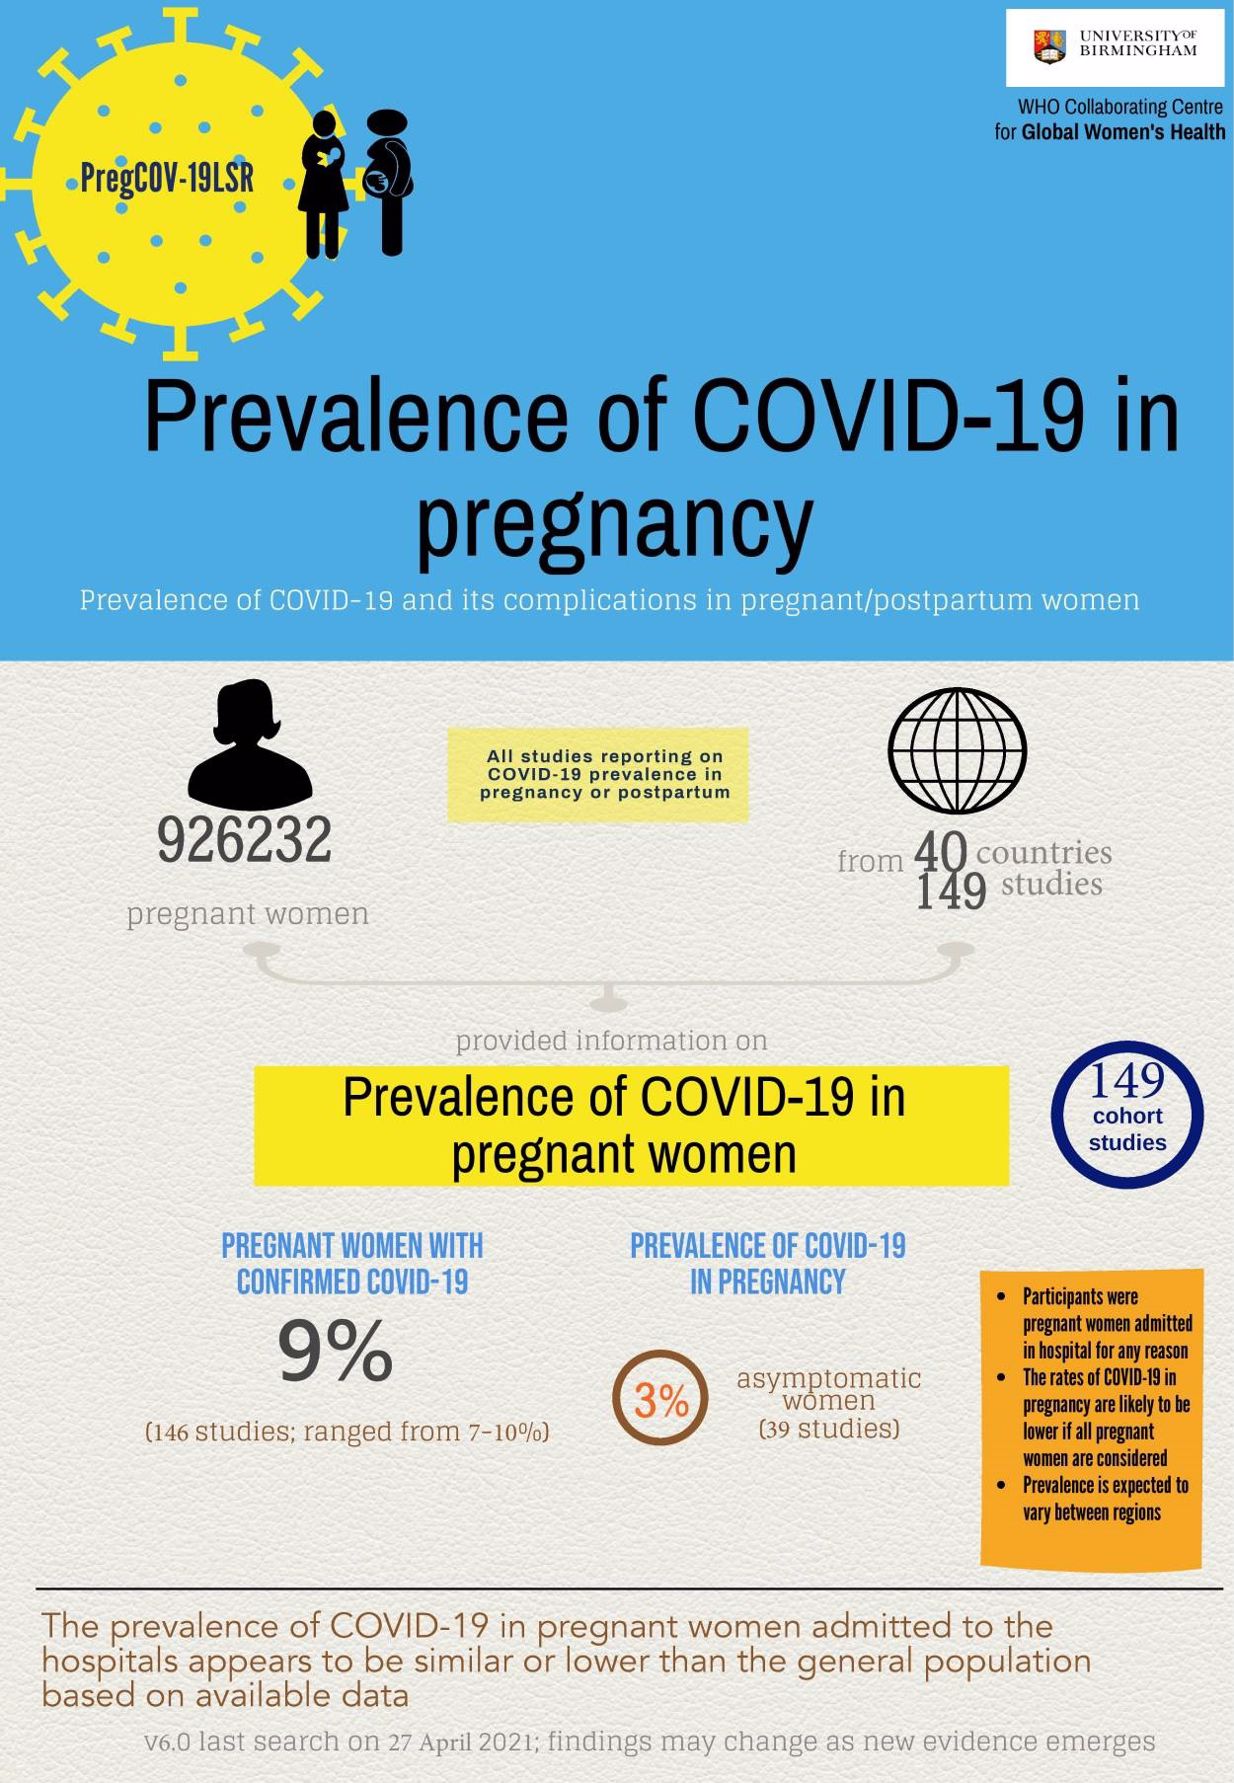 Diagram explaining prevalence of COVID-19 in pregnant women as detailed below